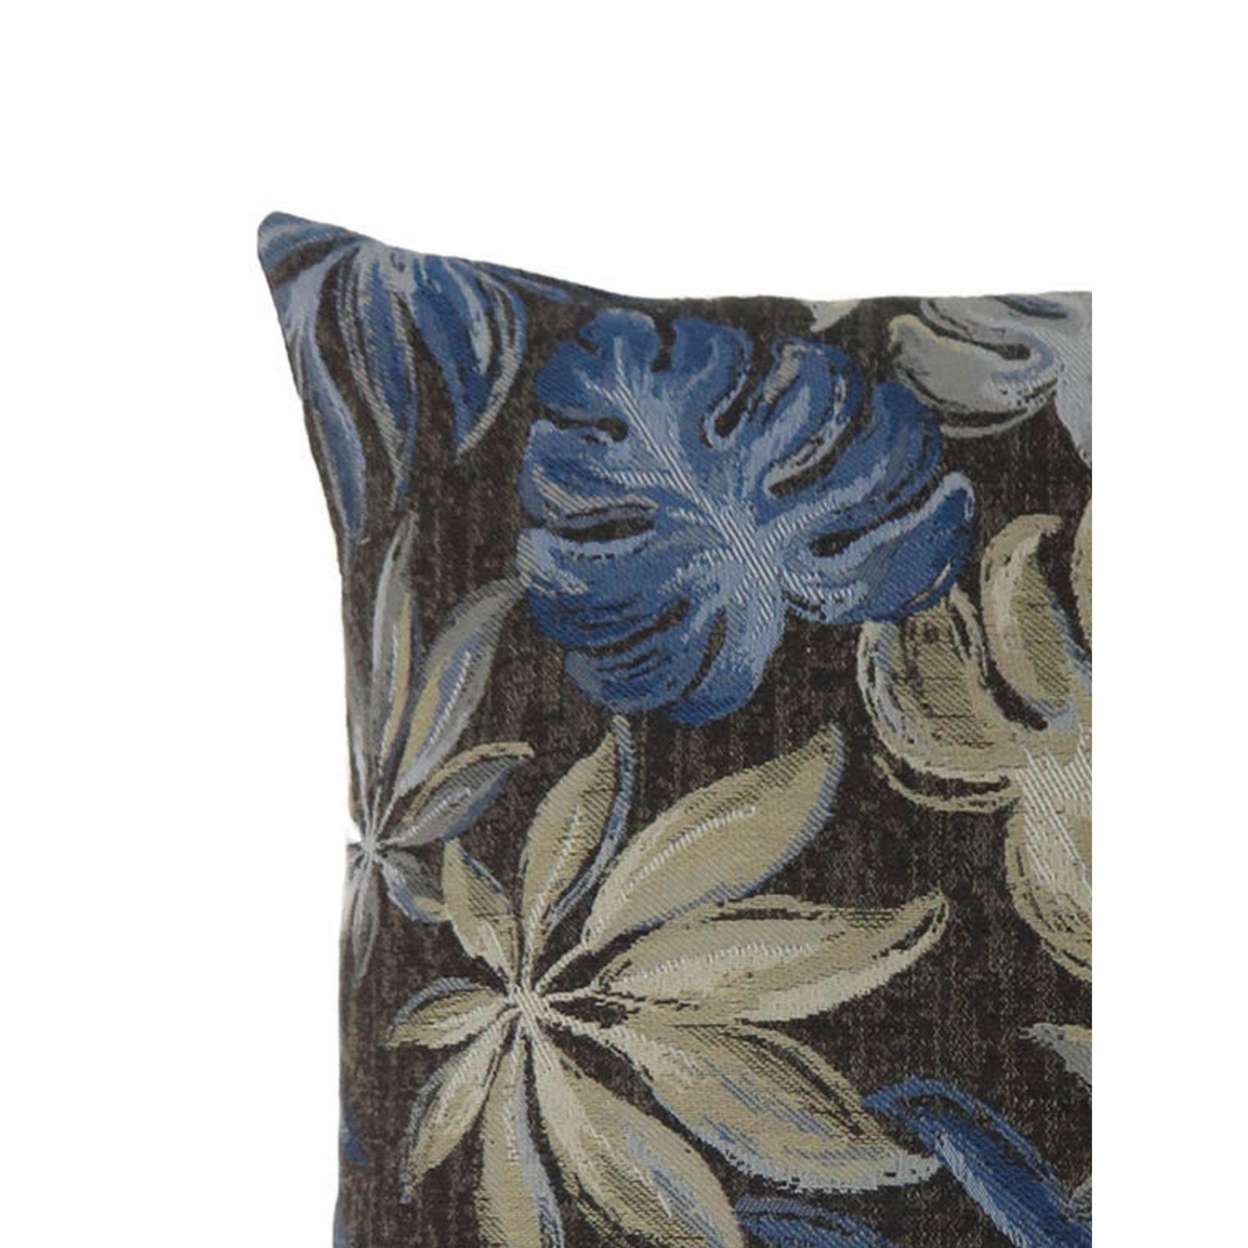 22 Inch Throw Pillow, Set Of 2, Leaf Pattern Polyester Fabric, Dark Gray, Blue